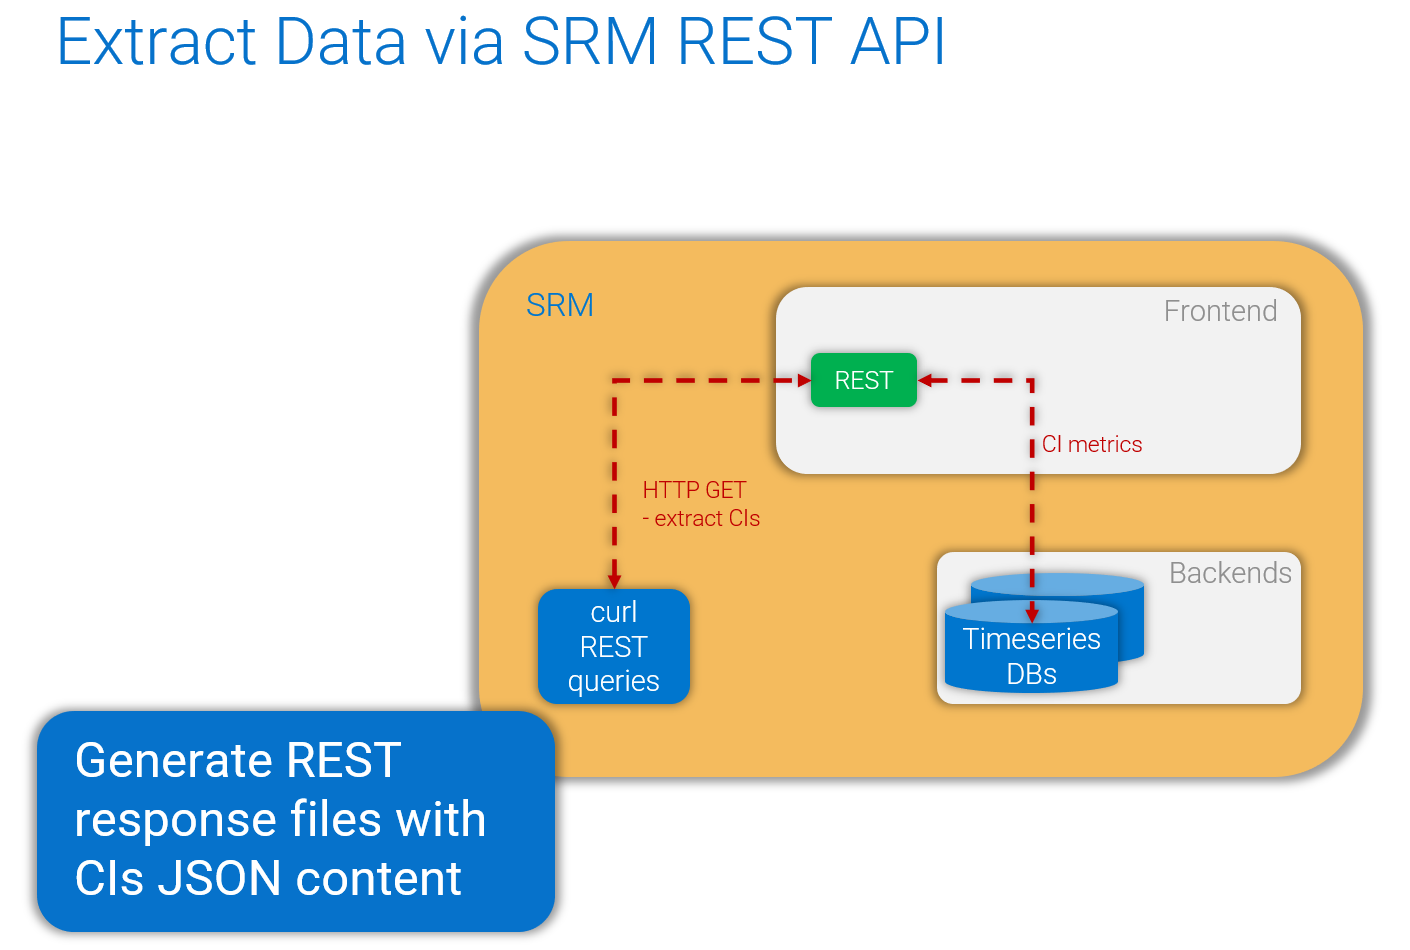 This diagram shows how to extract data via the SRM REST API, which generates REST response files with CIs JSON content